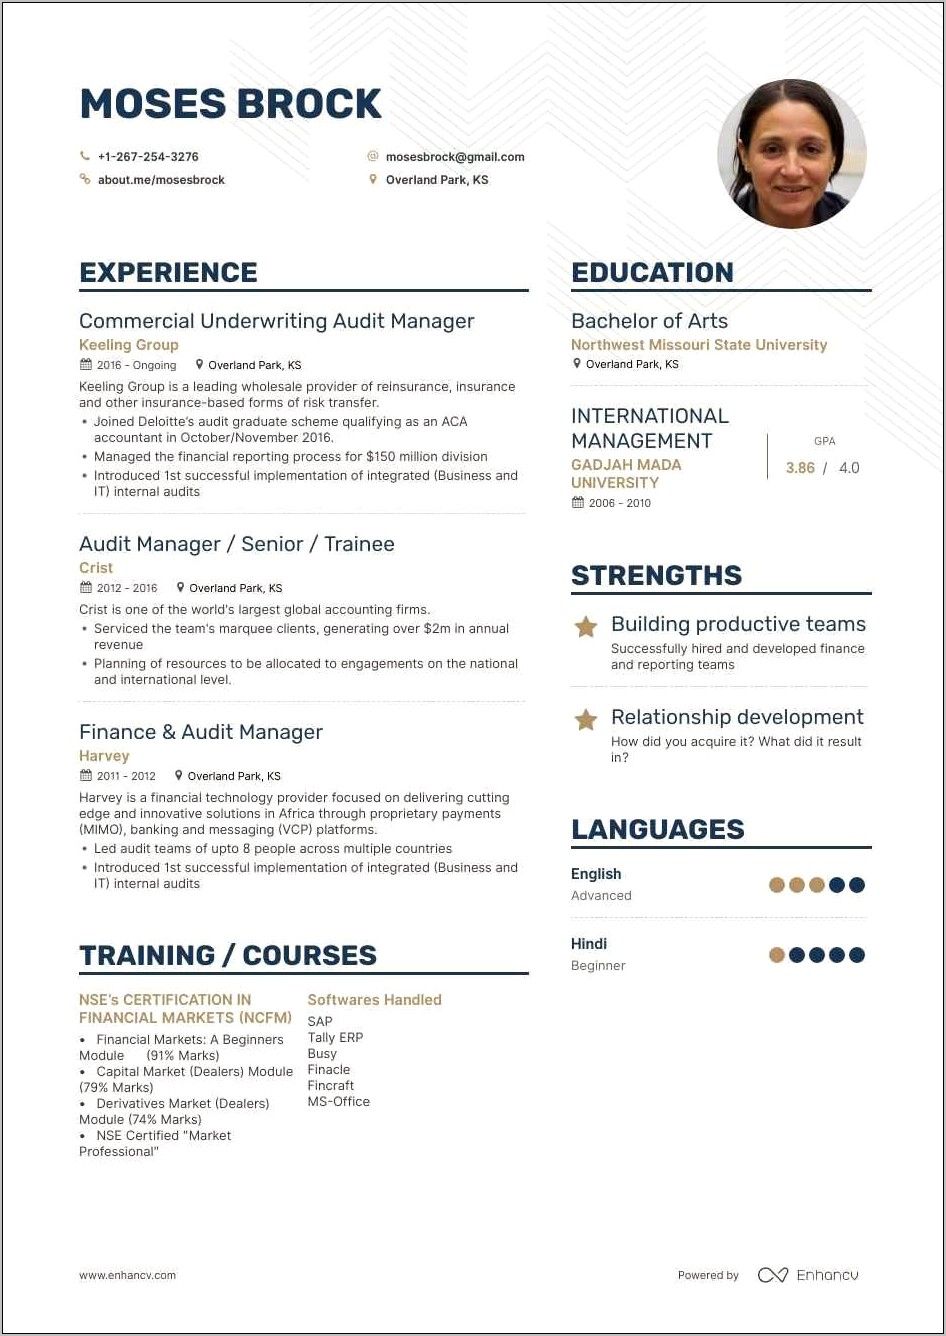 Sample Resume With Big 4 Experience